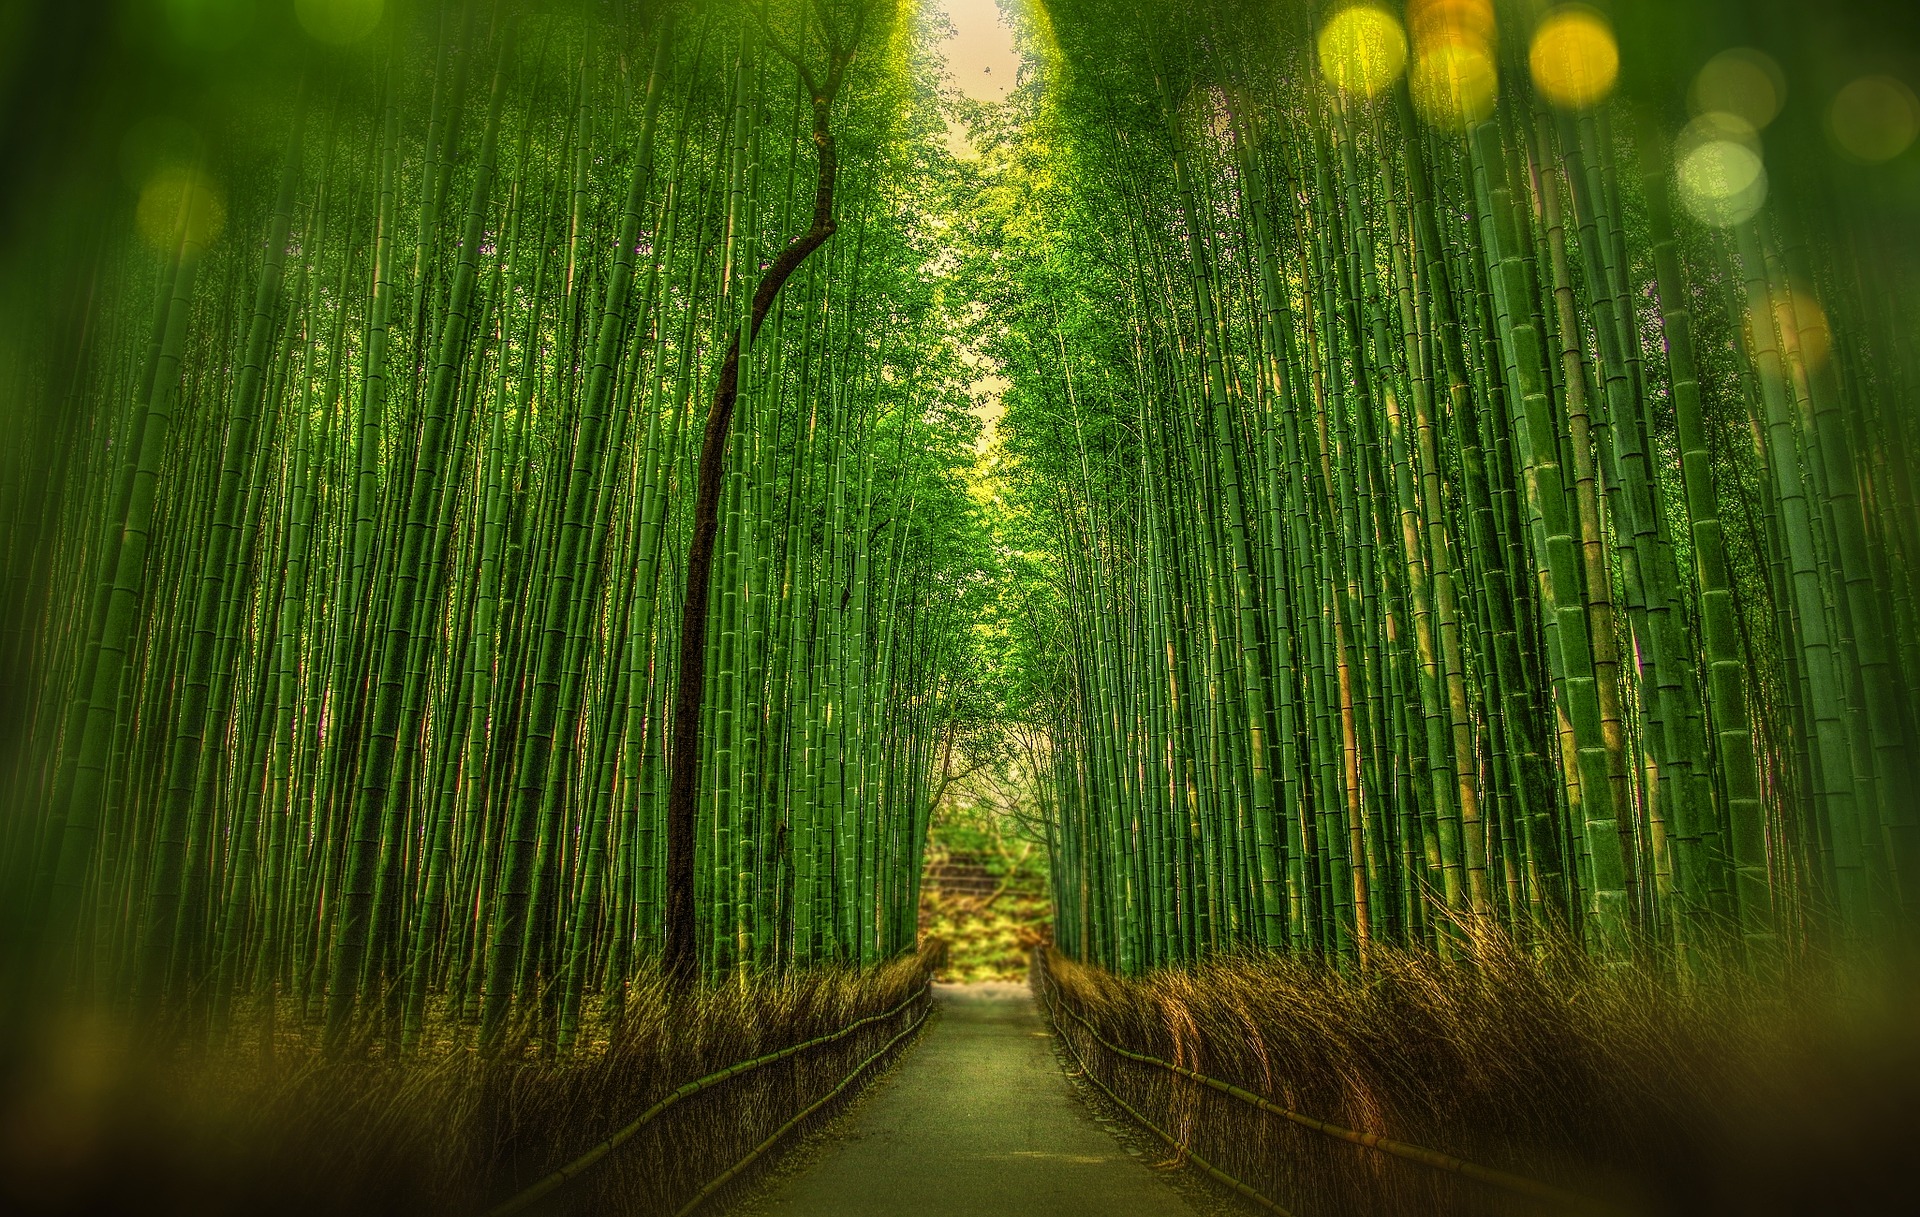 Bamboo forest view of road